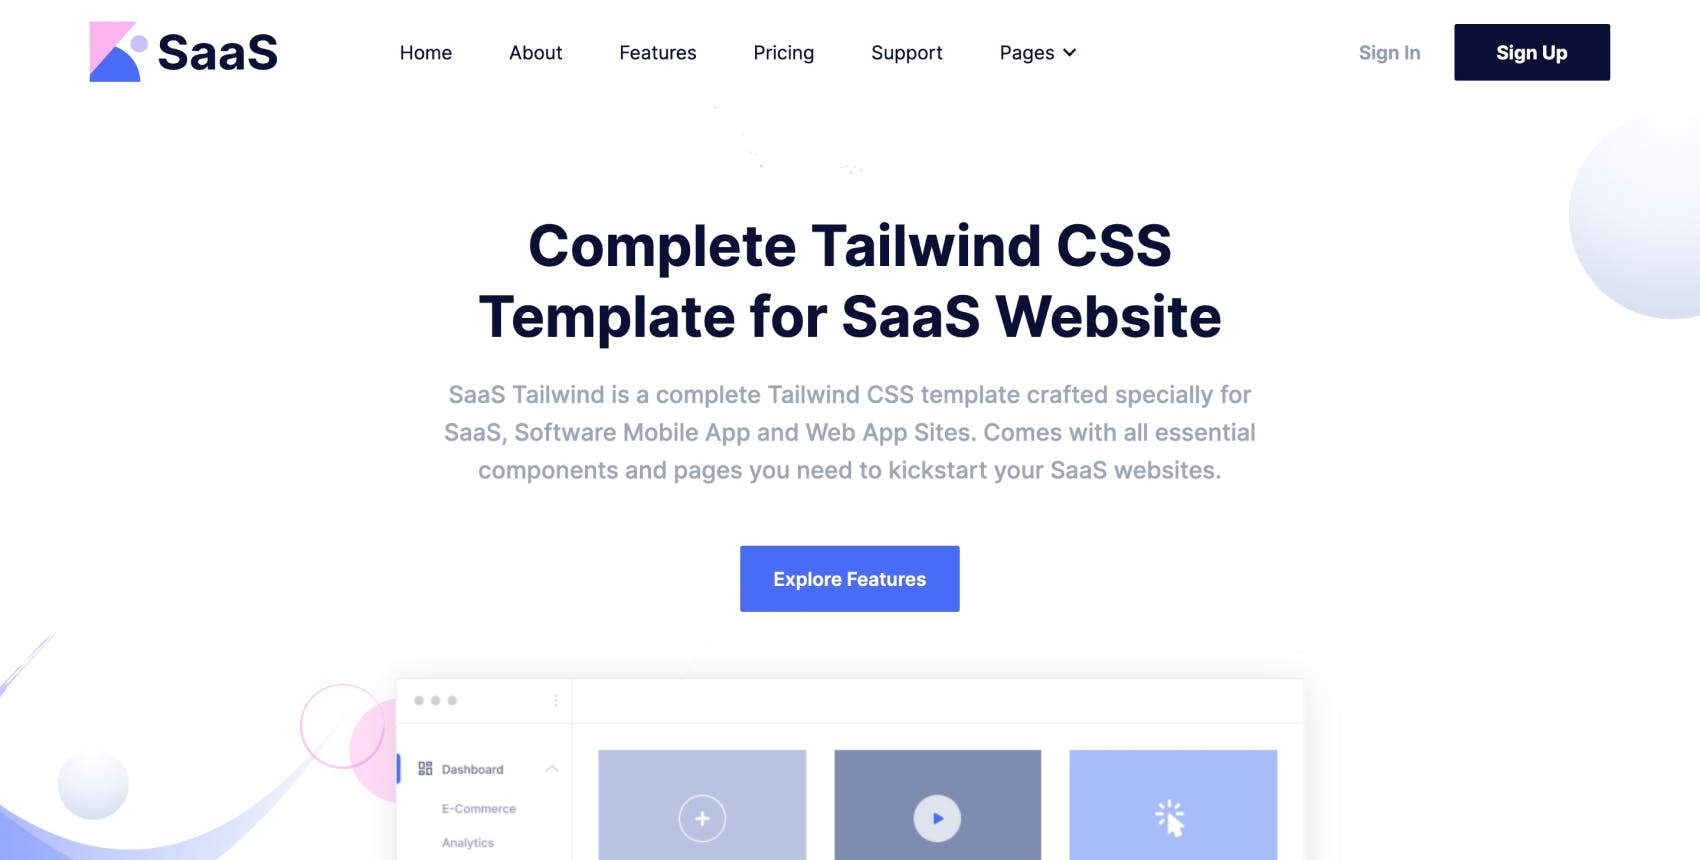 SaaS - Tailwind CSS Template for SaaS and Software Site